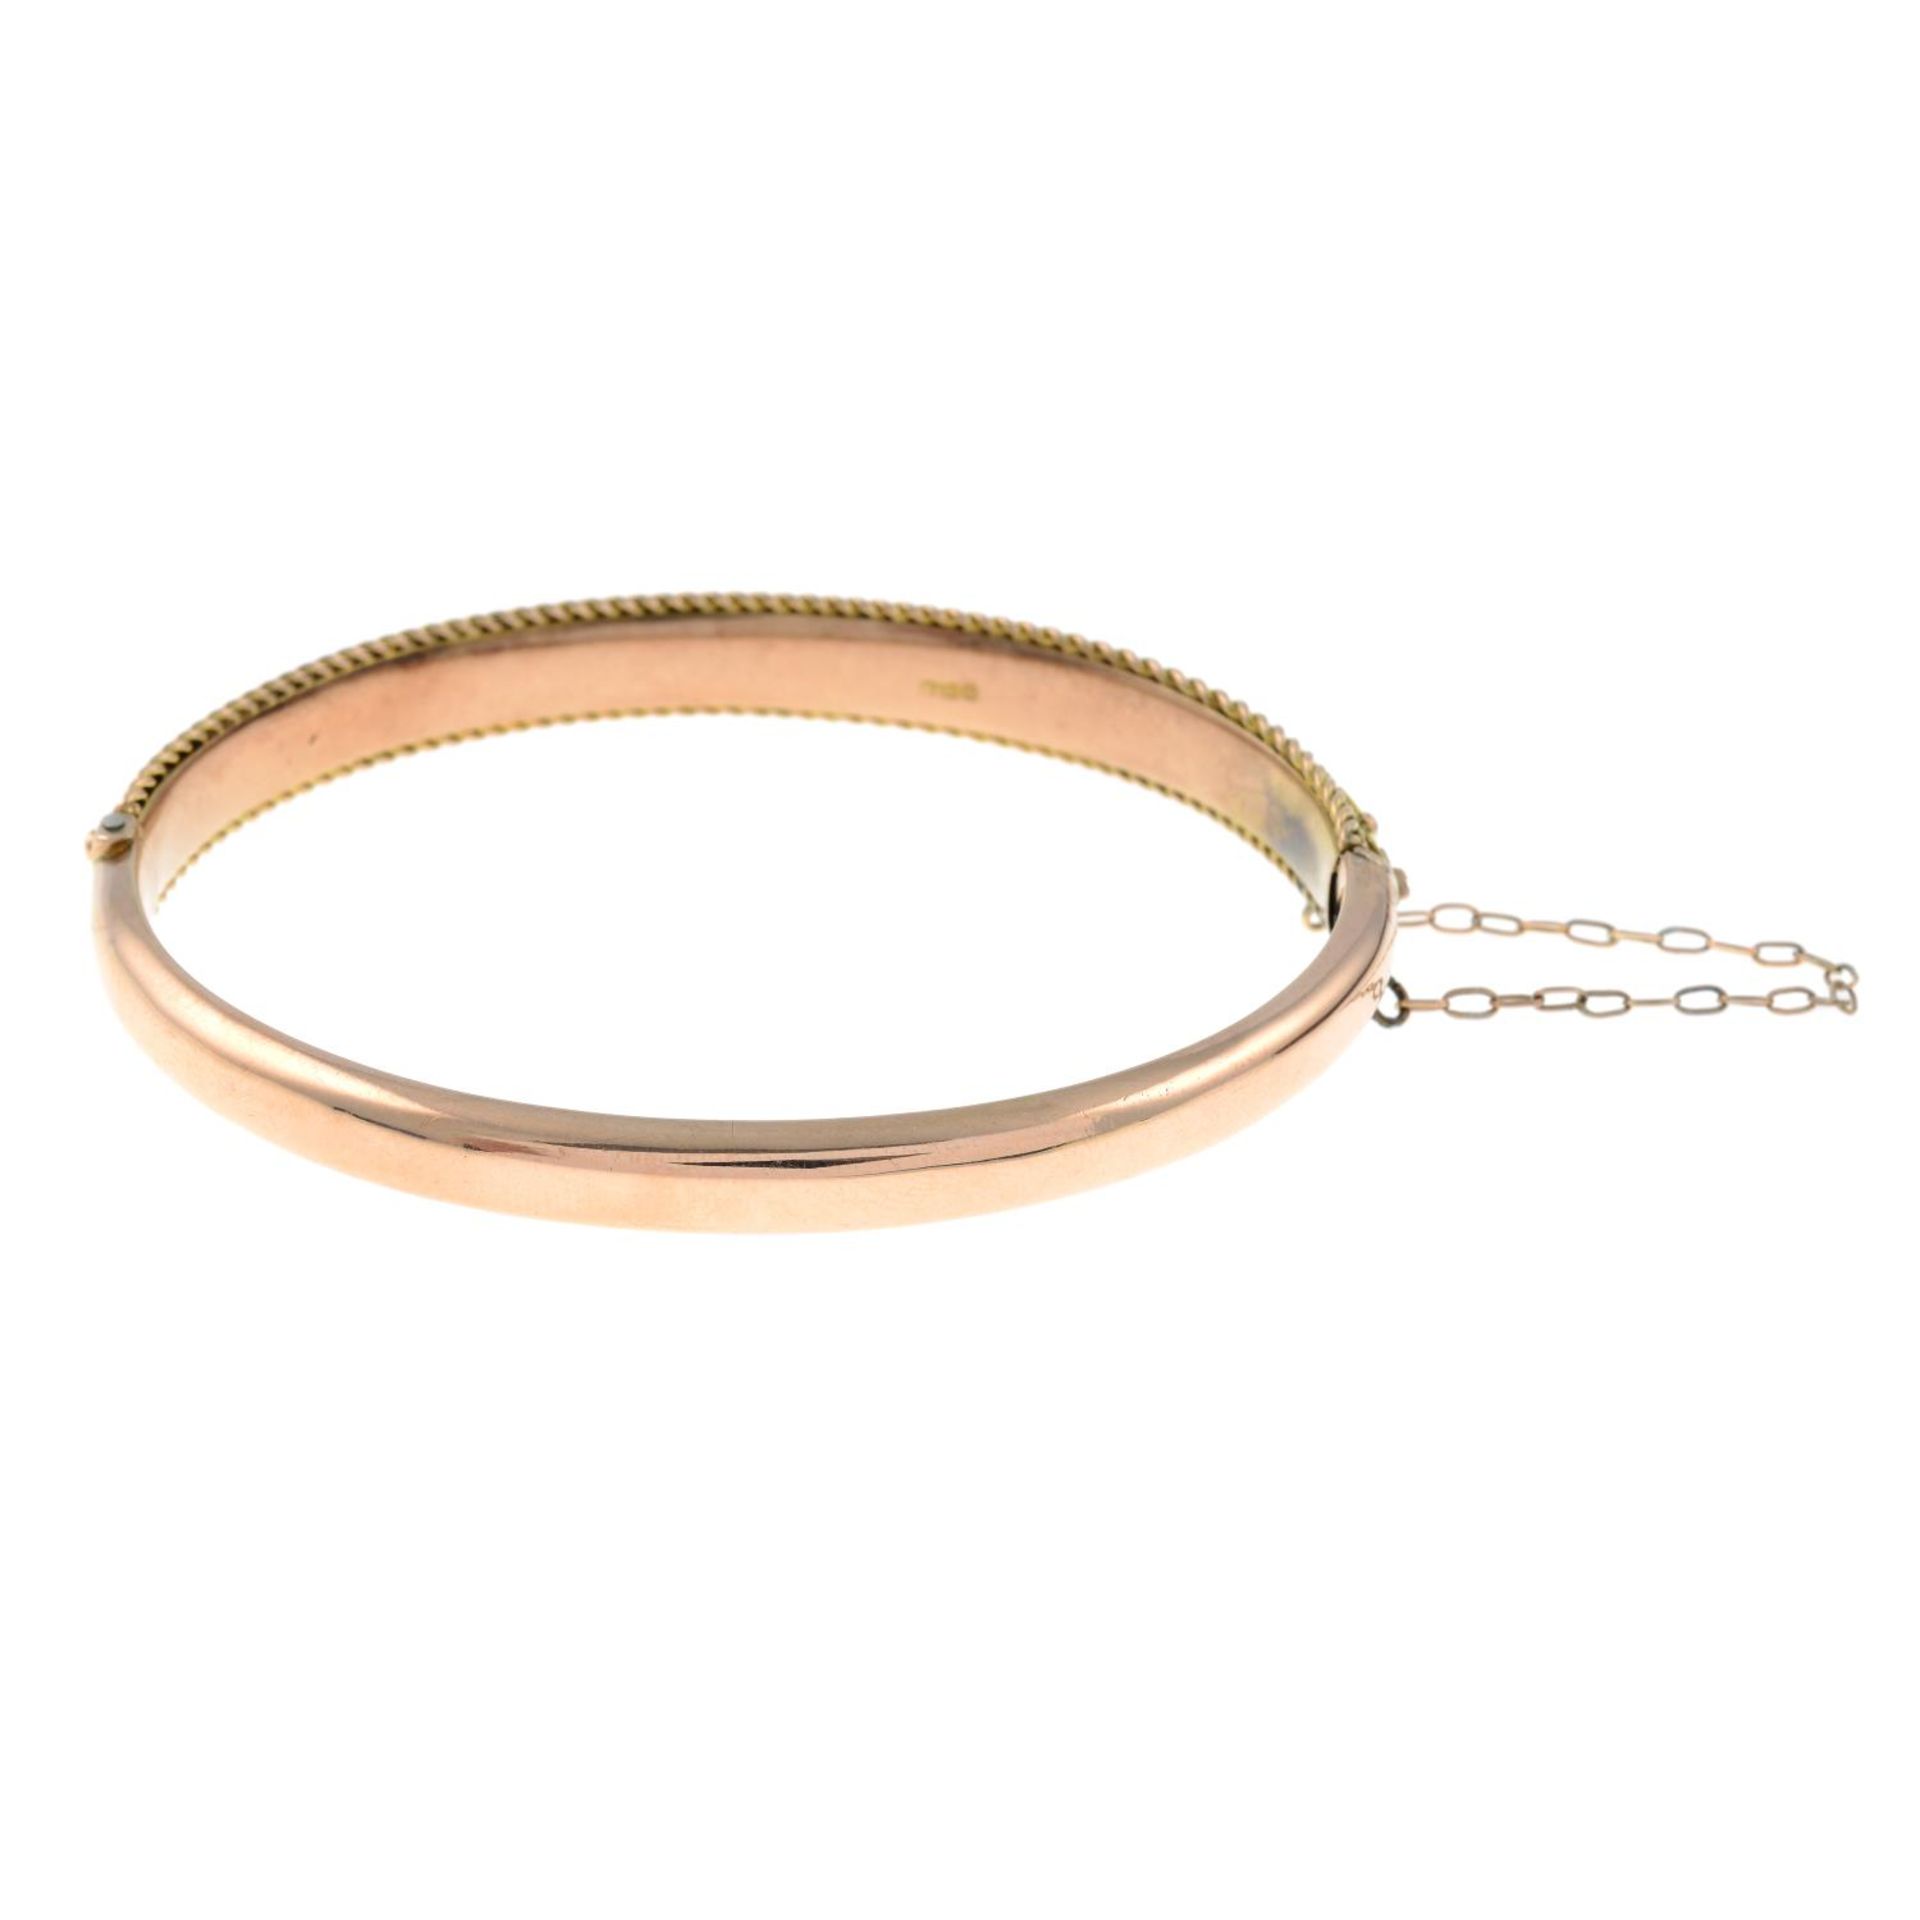 An Edwardian 9ct gold cannetille hinged bangle.Hallmarks for Chester, 1905.Inner diameter 6cms. - Image 2 of 2